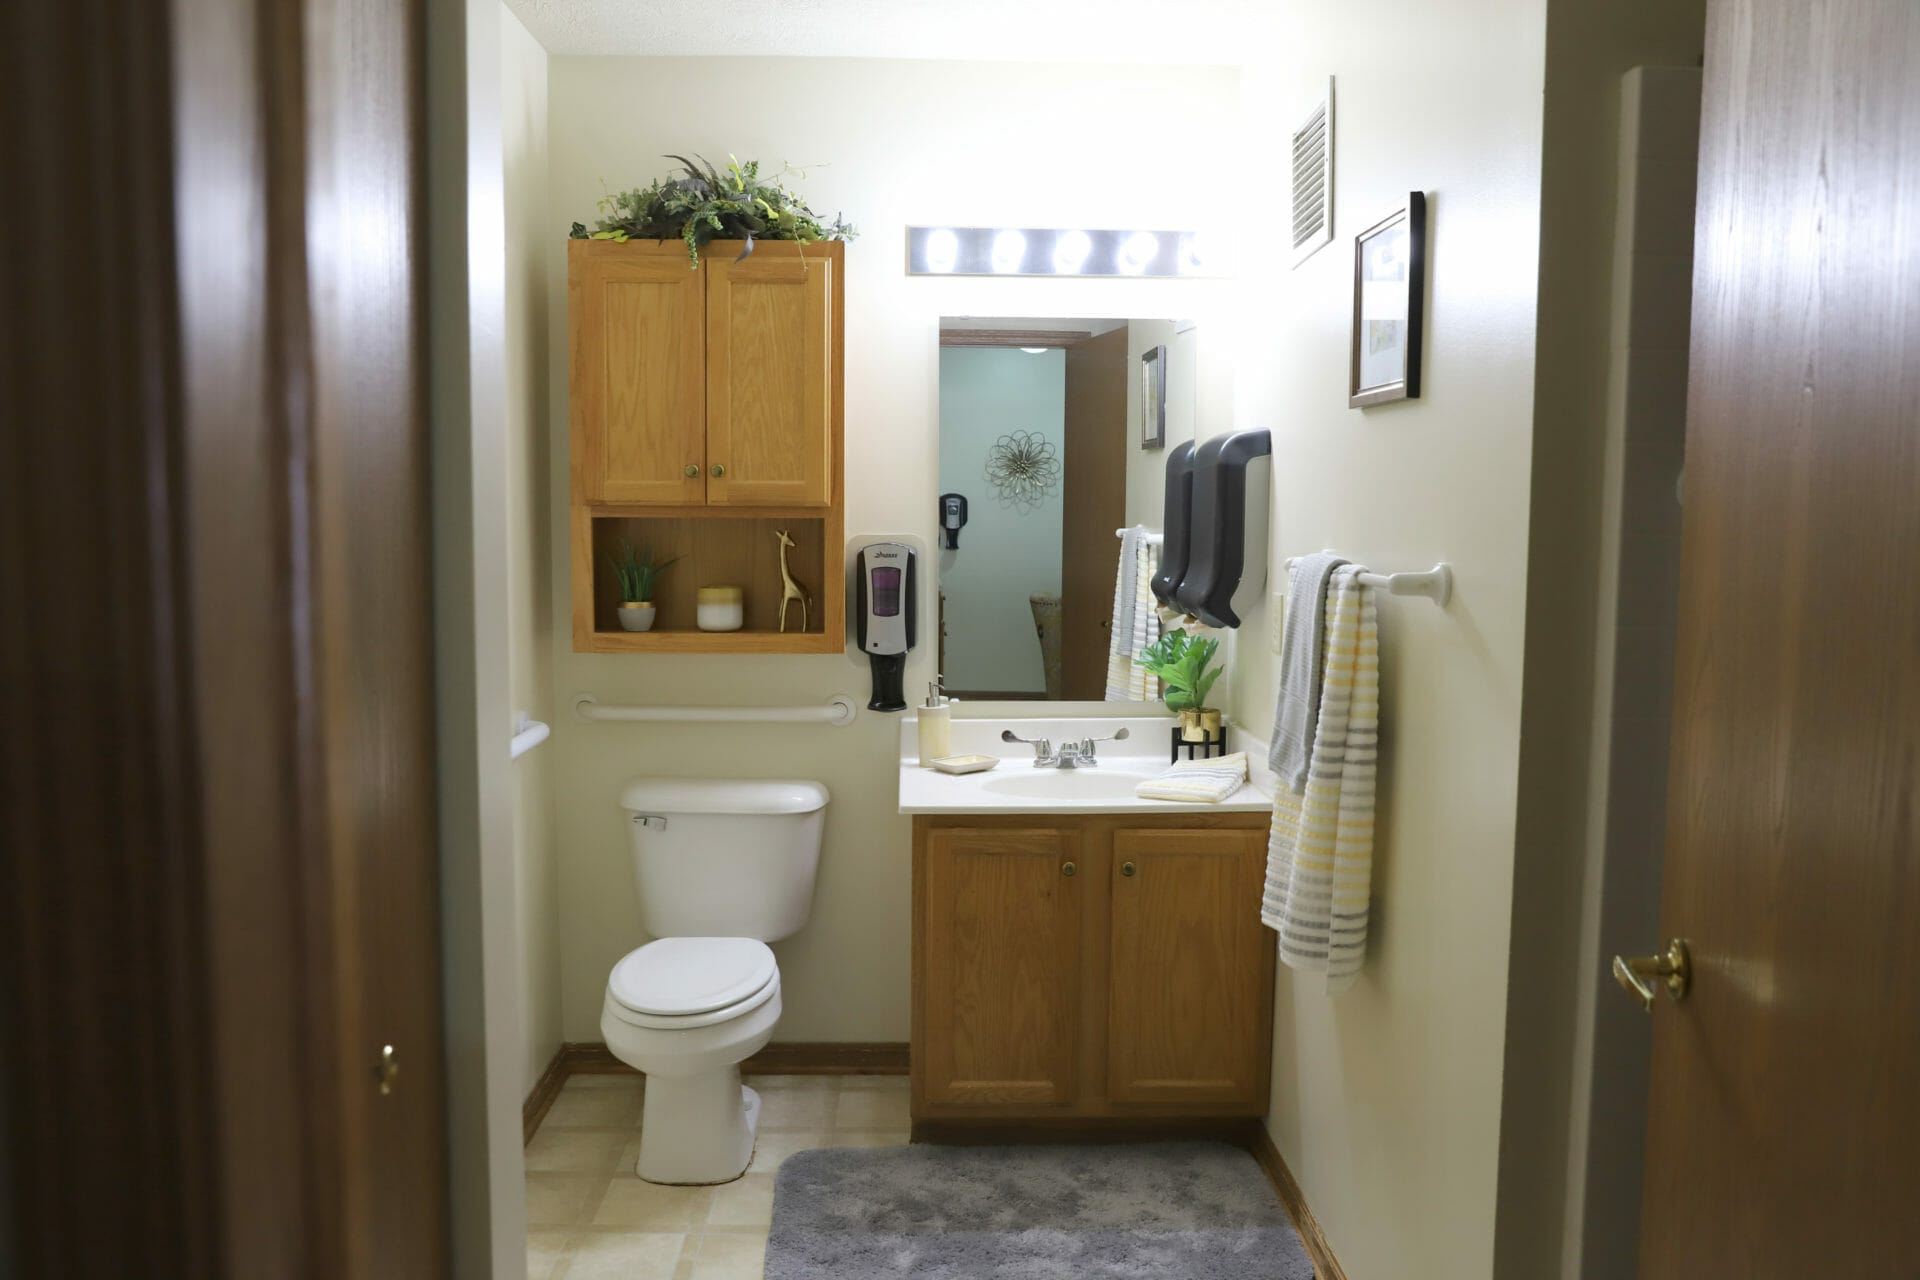 <span  class="uc_style_uc_tiles_grid_image_elementor_uc_items_attribute_title" style="color:#000000;">Bathroom with sink and toilet in a studio. </span>